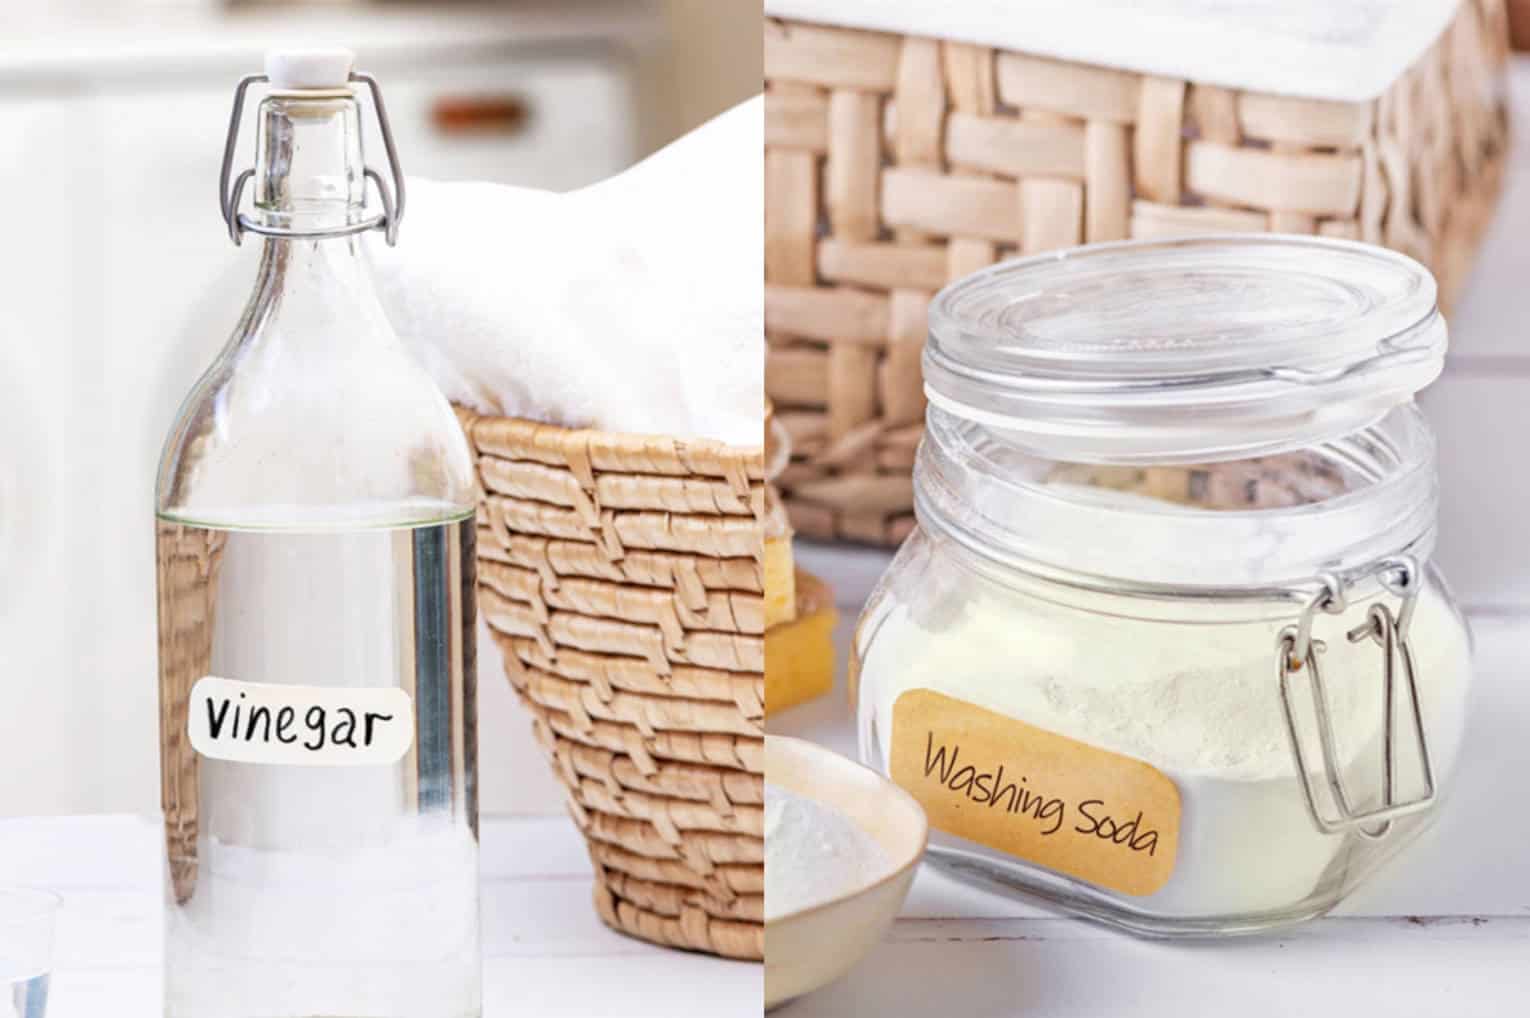 Use vinegar and baking soda to remove stains